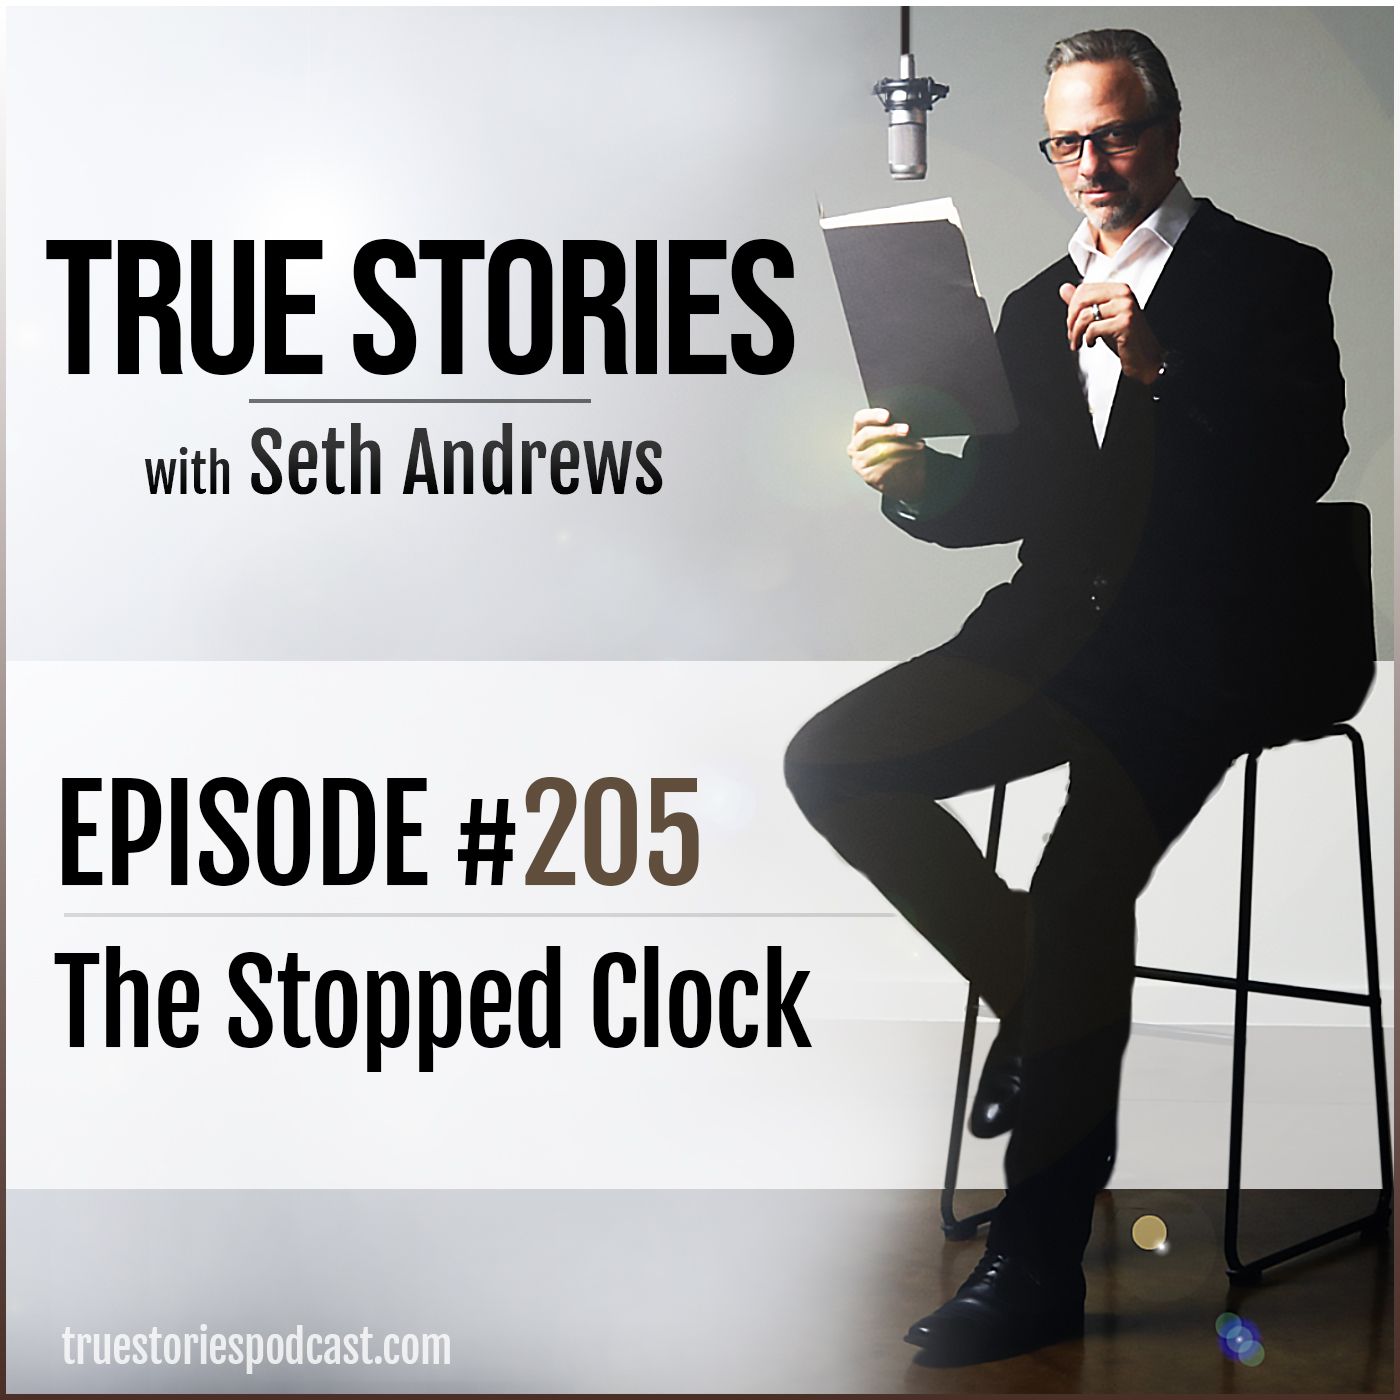 True Stories #205 - The Stopped Clock